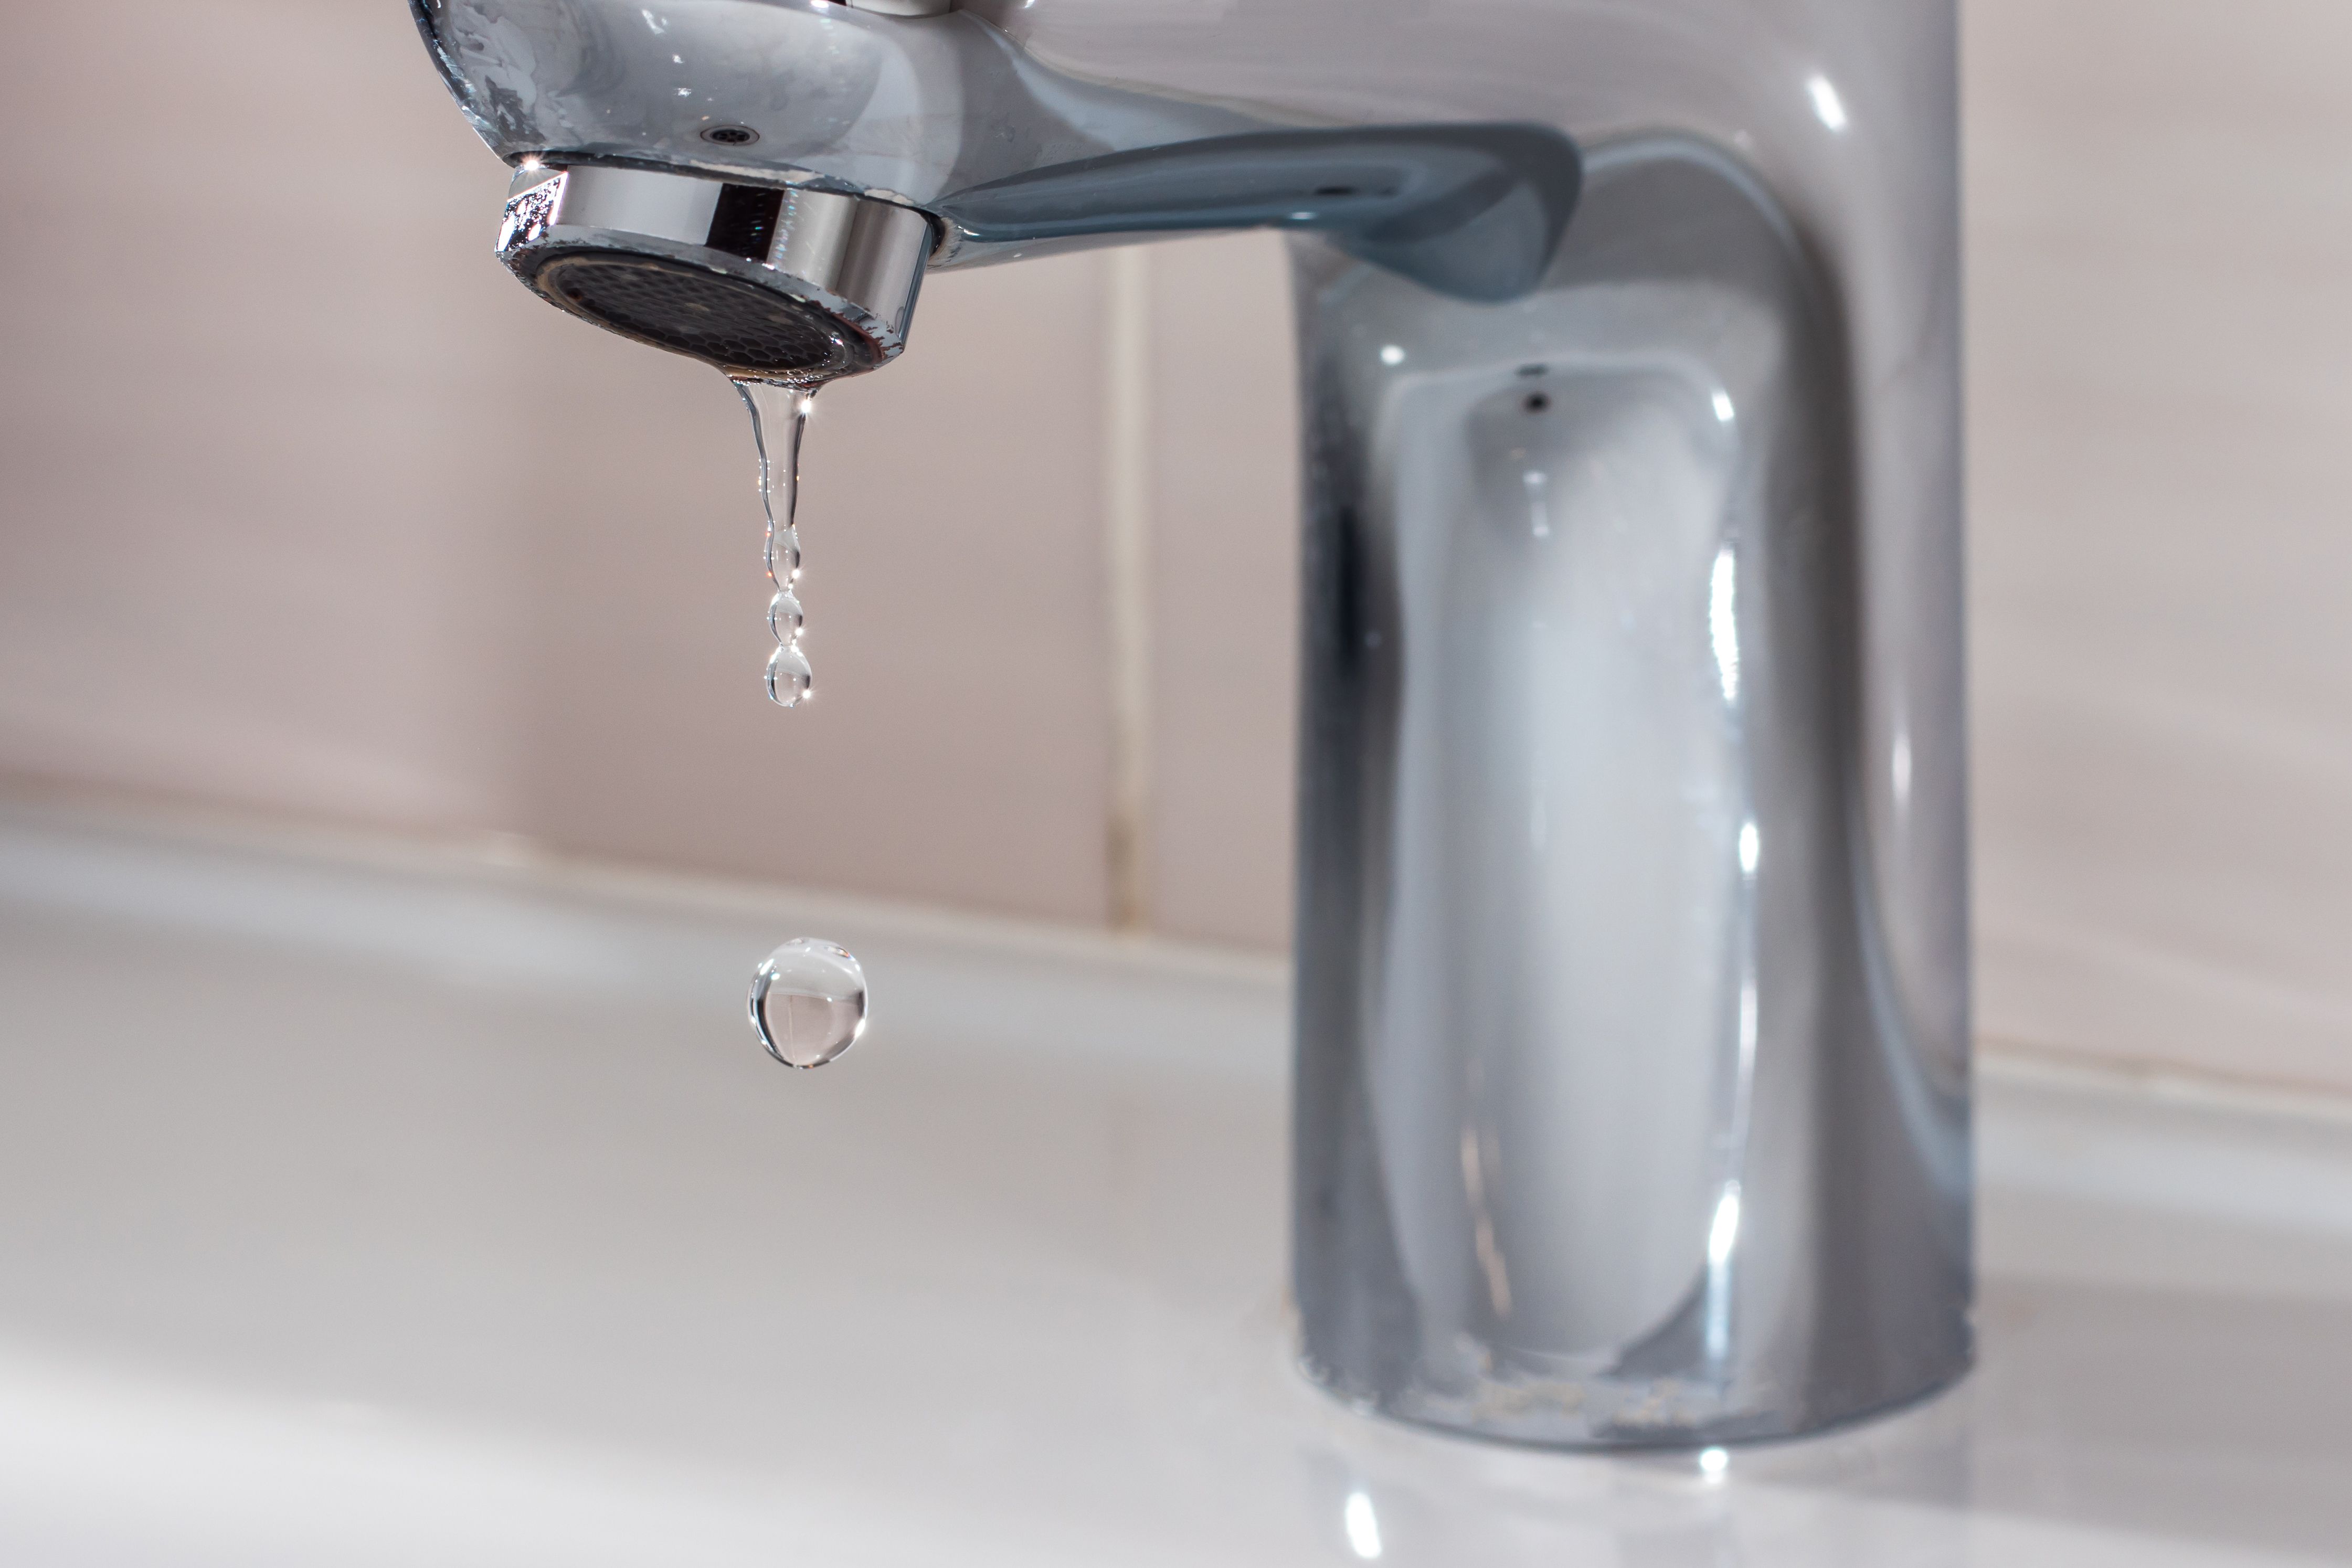 How to Fix a Leaky Faucet - 13 Easy Steps to Fix a Faucet